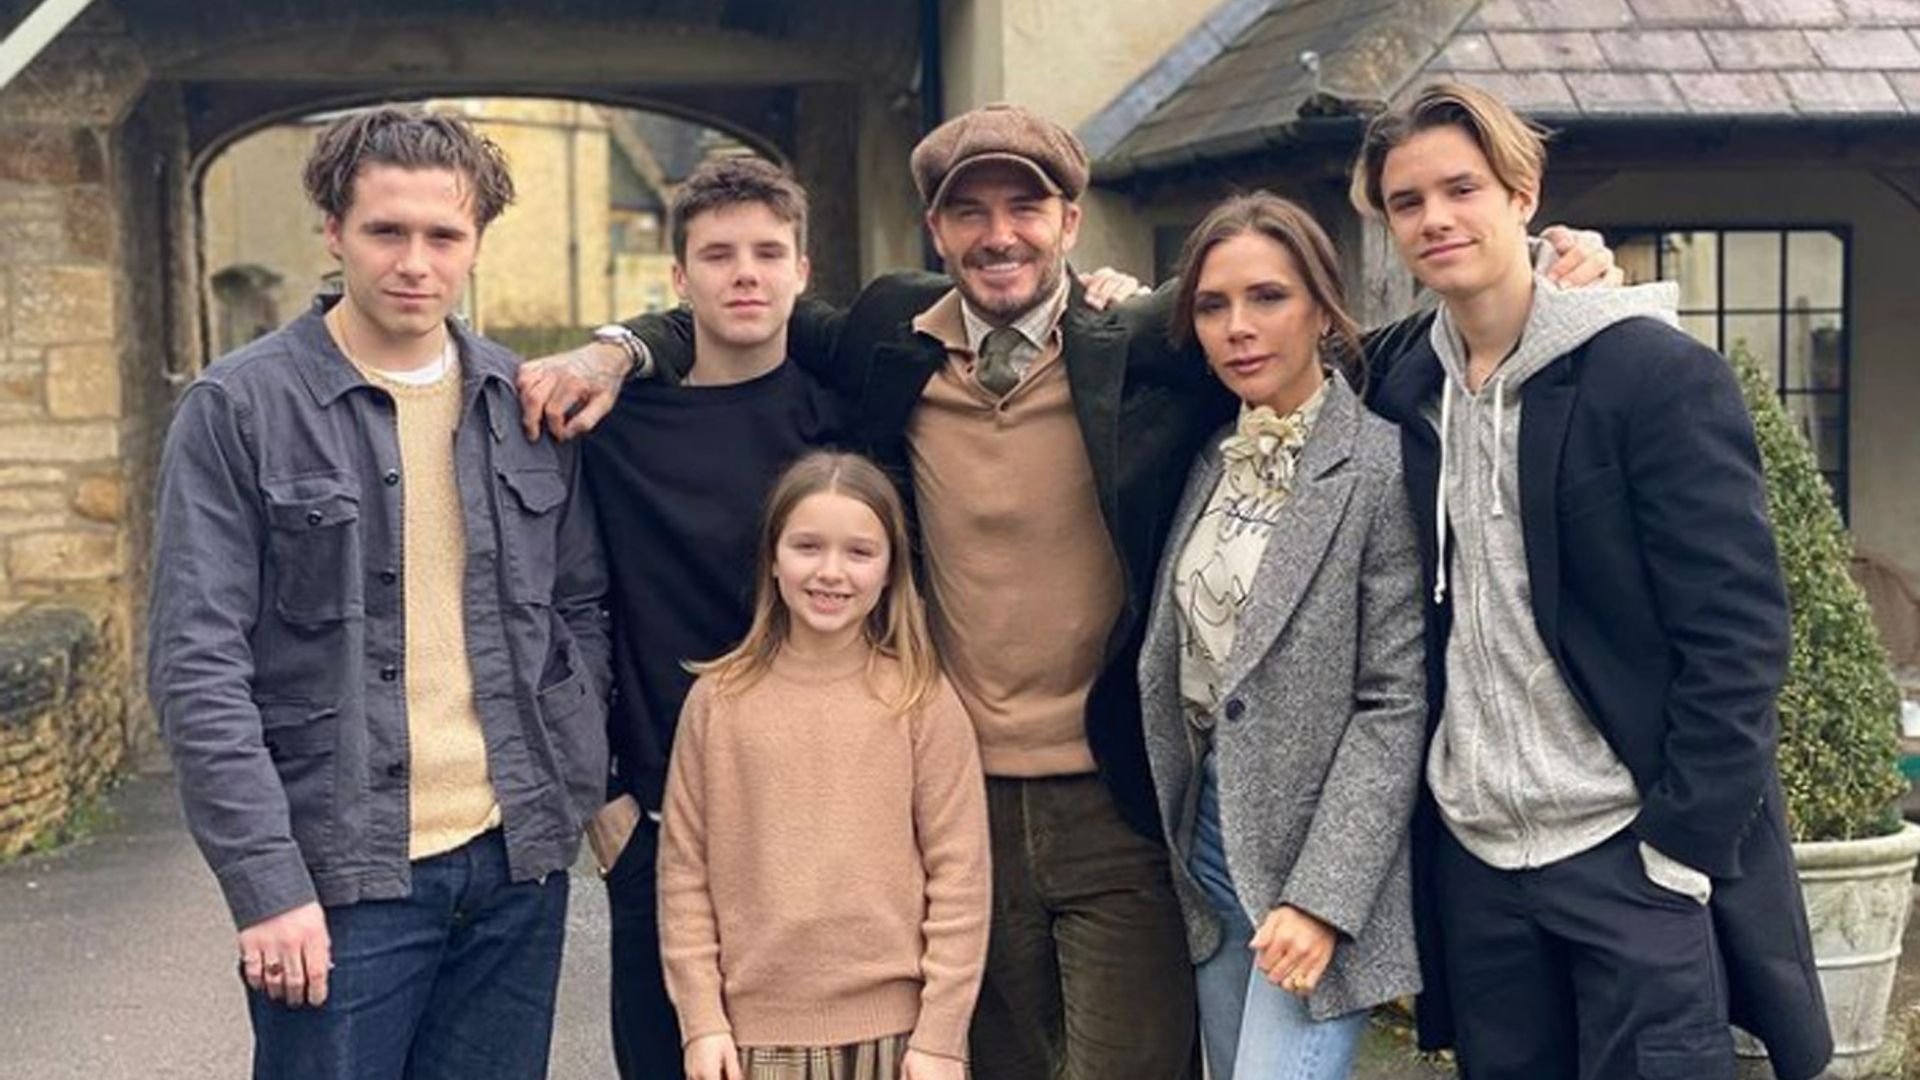 Victoria Beckham and her family rally after son's SHOCK split HELLO!